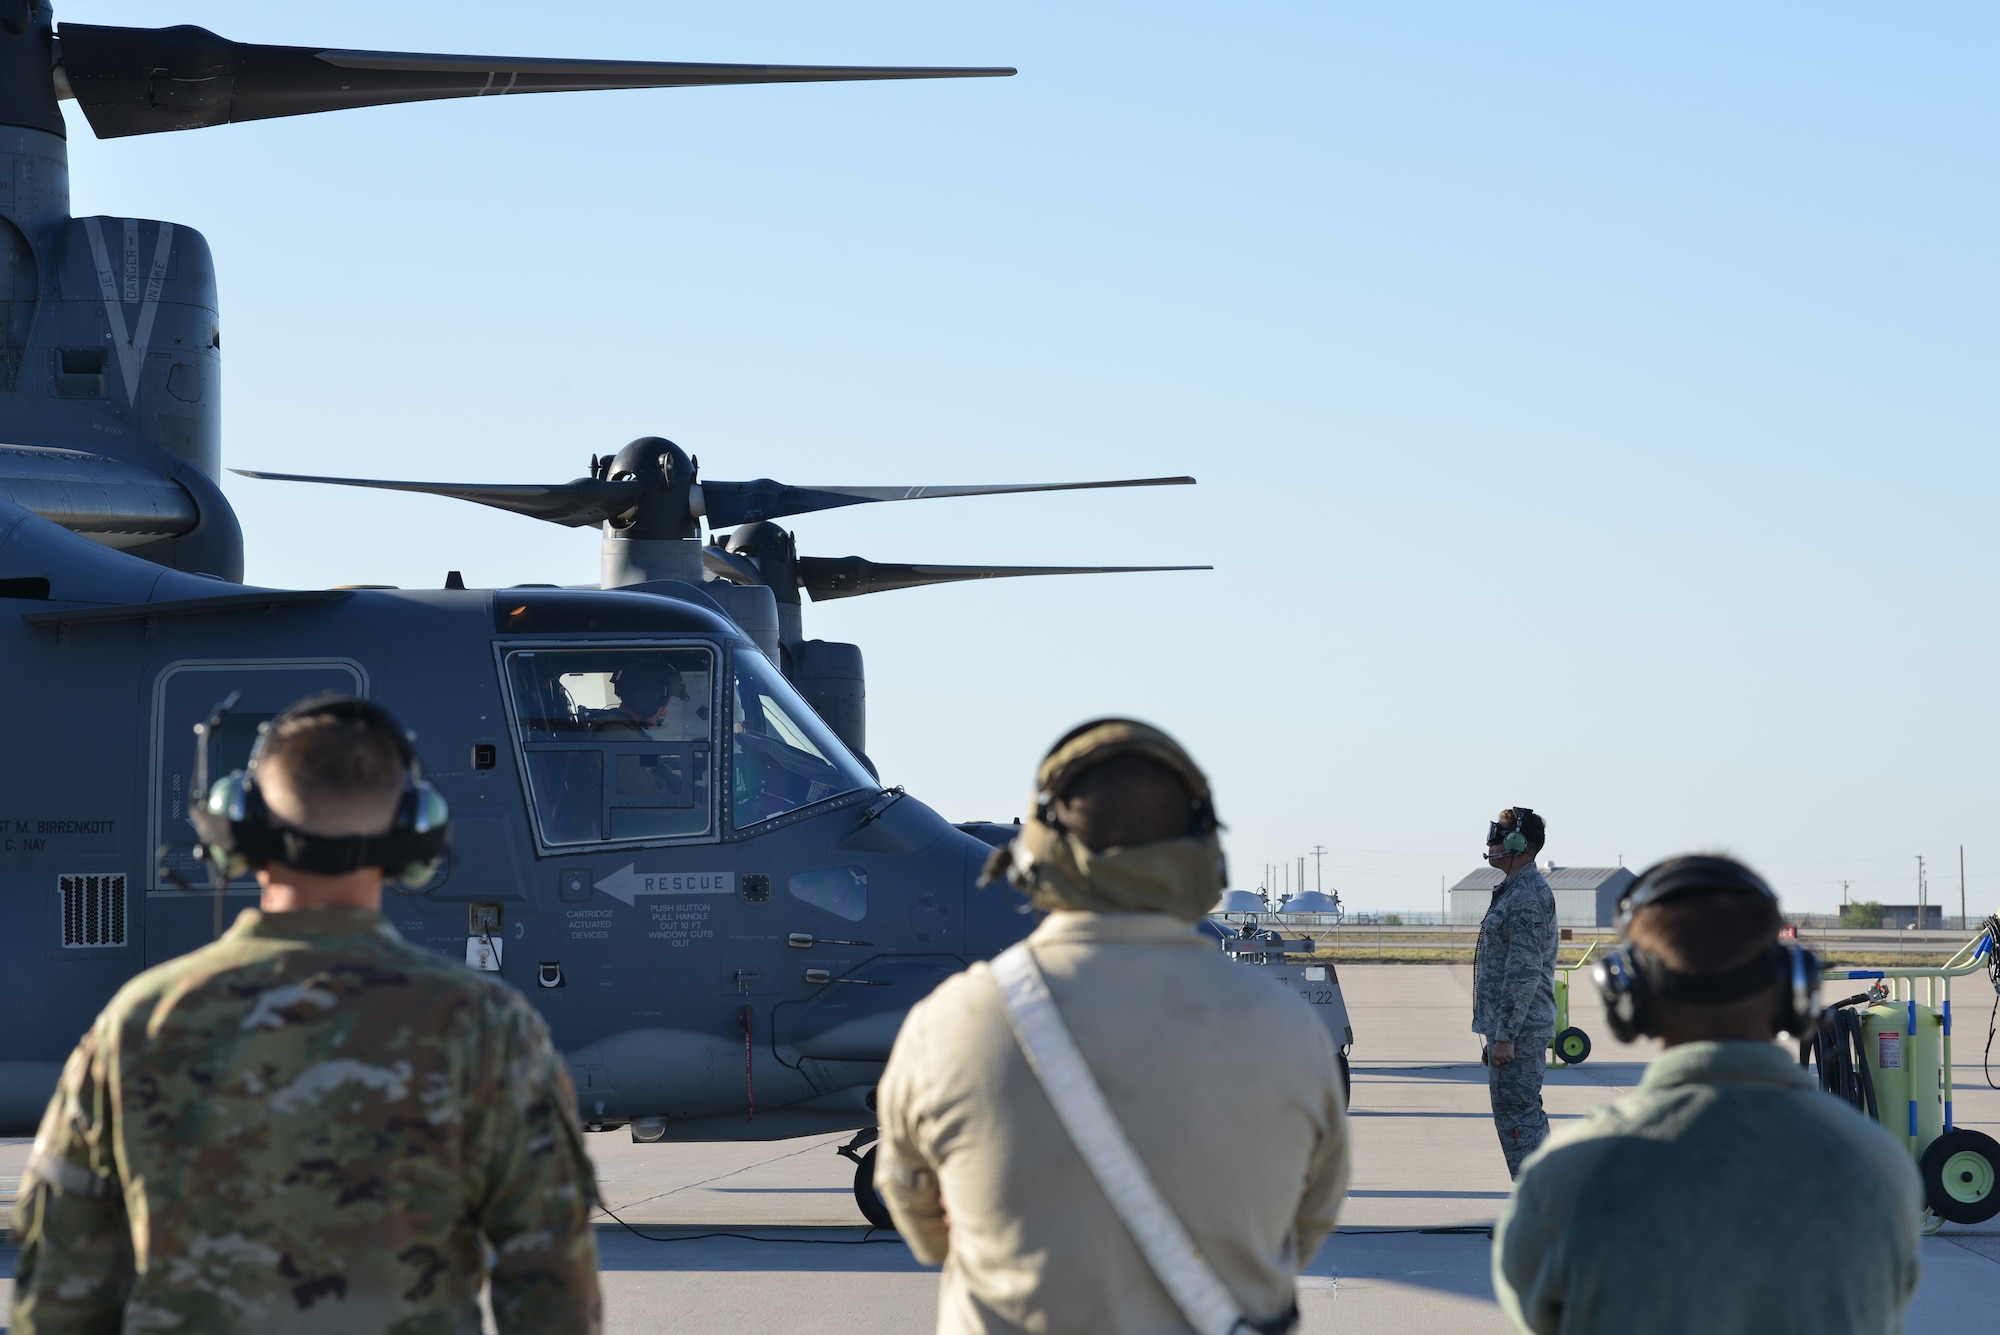 Members of the 71st Aircraft Maintenance Unit look on during pre-flight checks at Kirtland Air Force Base, N.M., Oct. 7, 2019. Over the last fiscal year, the AMU hit their 1,500 flight hour goal for the CV-22 Osprey. The mission of the 71st AMU is to provide mission ready CV-22 Ospreys for the 71st Special Operations Squadron. (U.S. Air Force photo by Staff Sgt. Dylan Nuckolls)